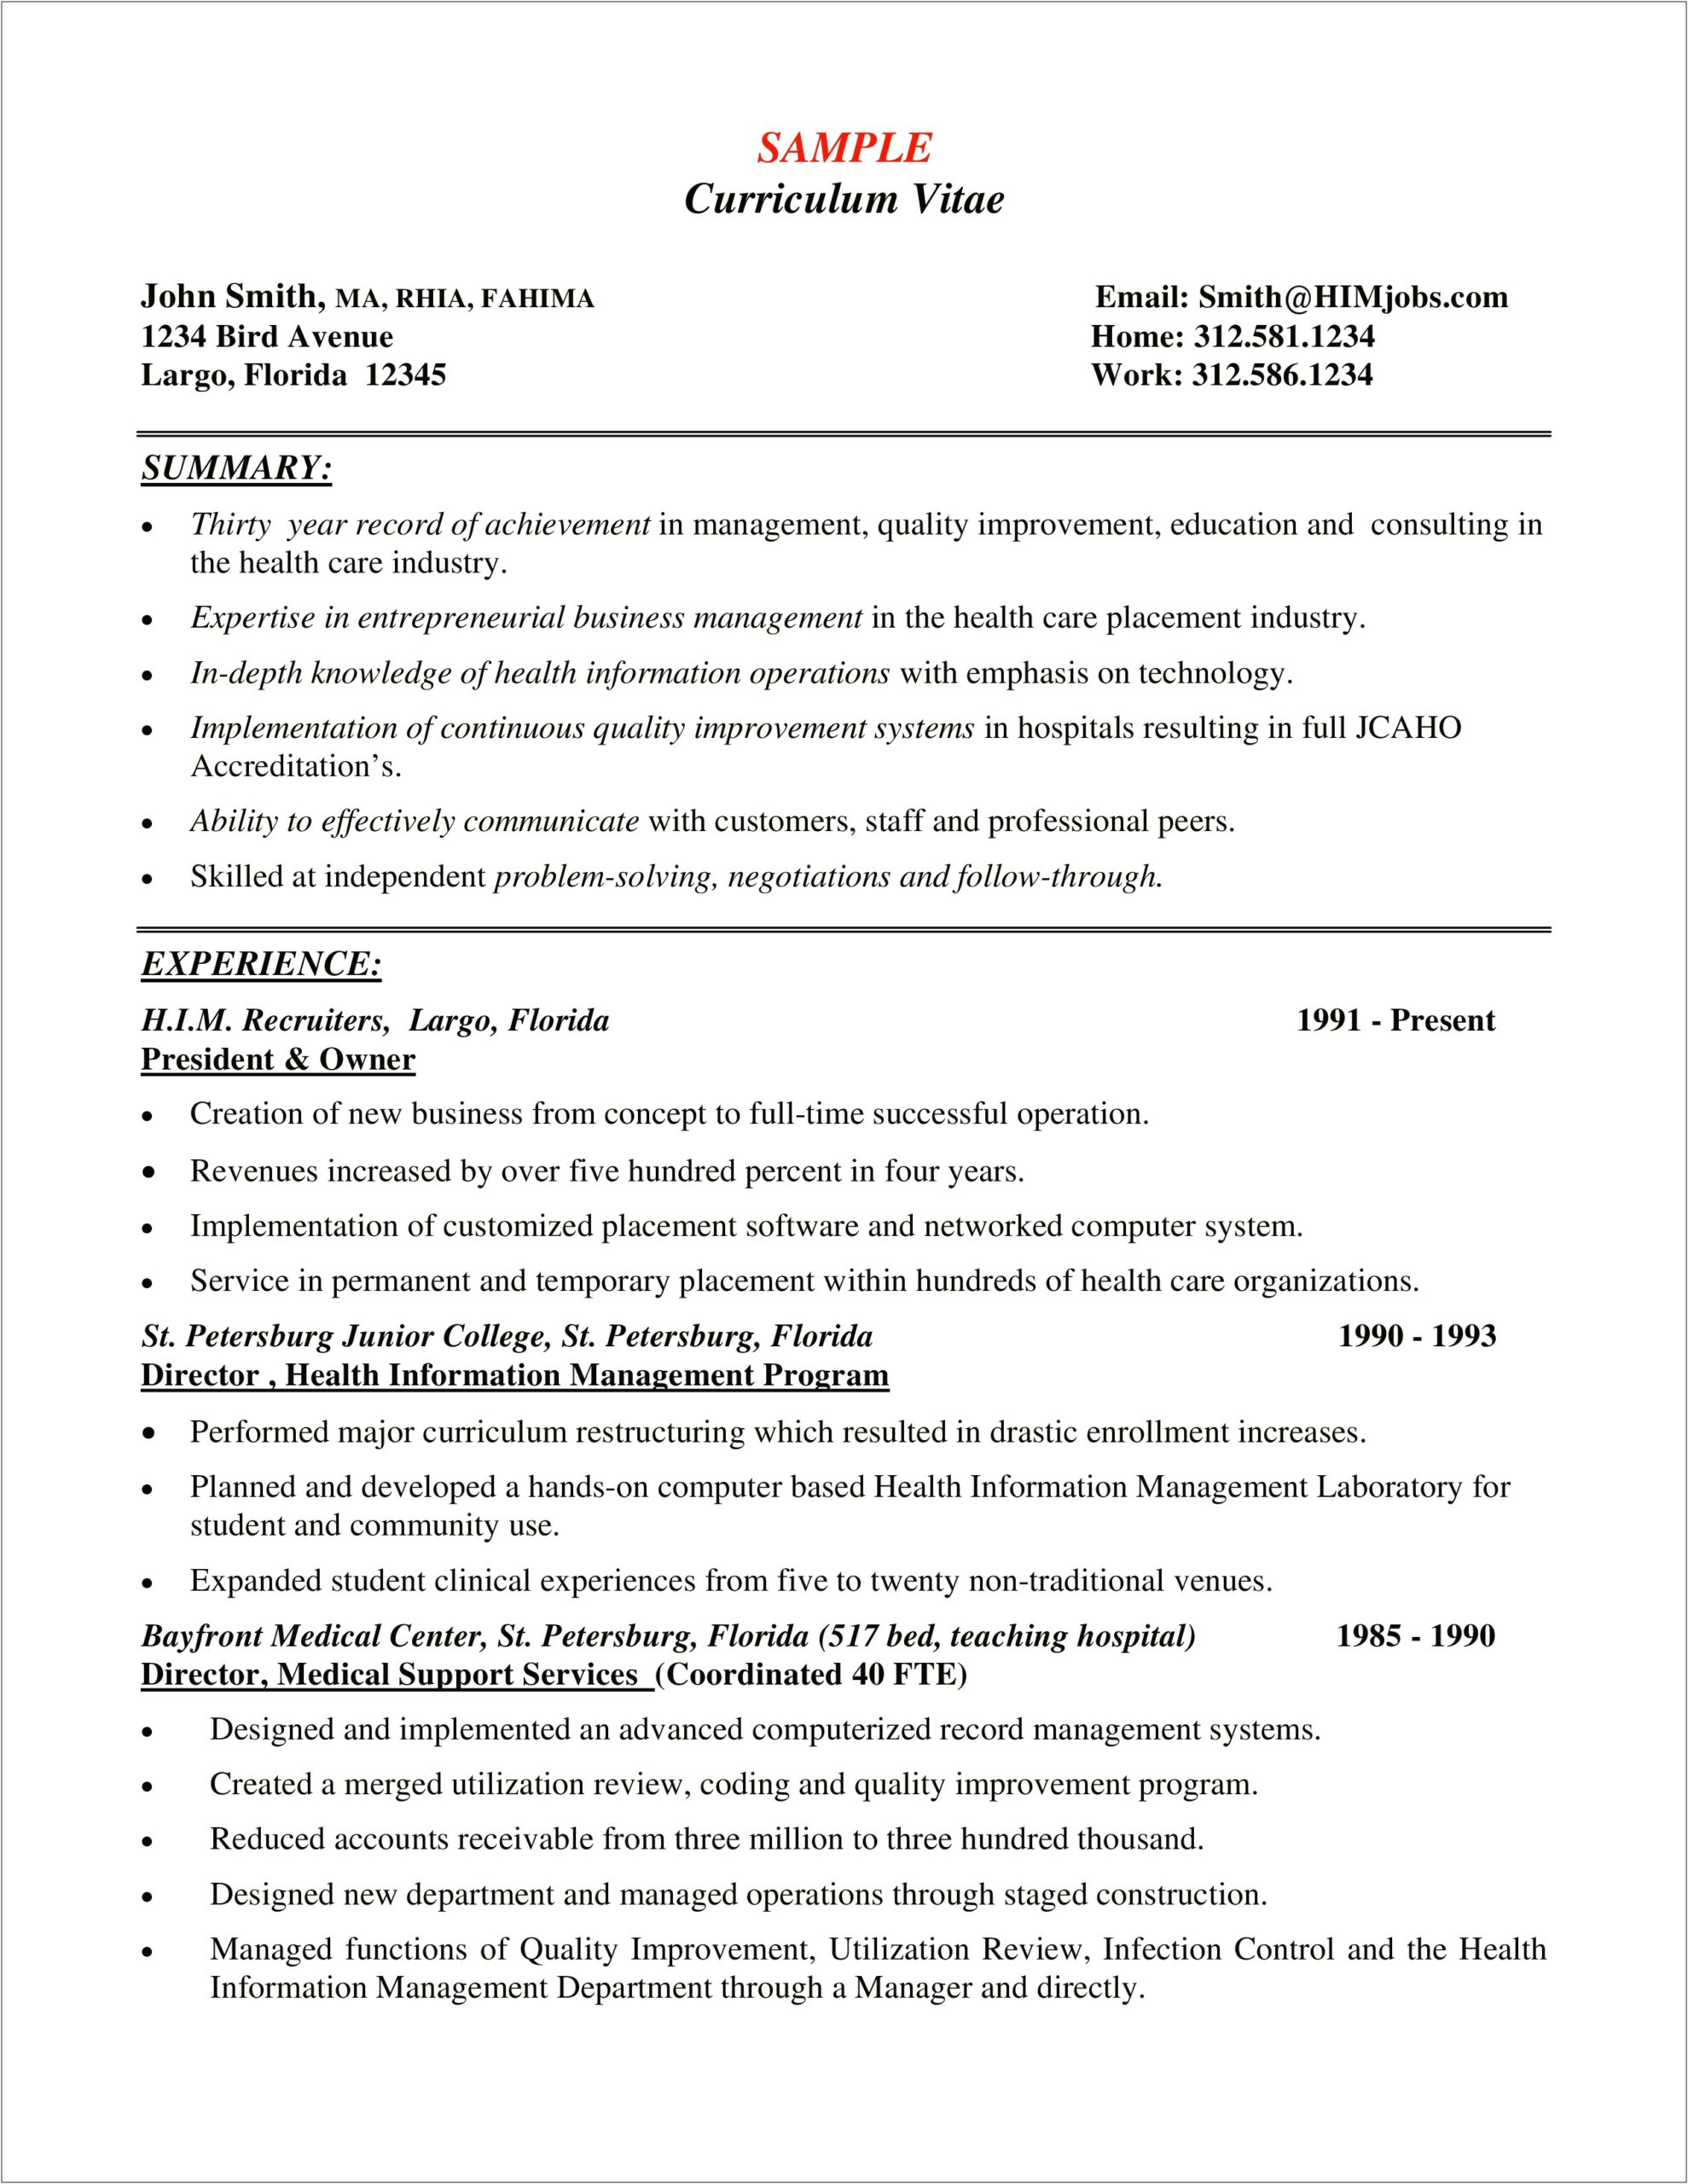 Resume Example For Healthcare Management Positiona